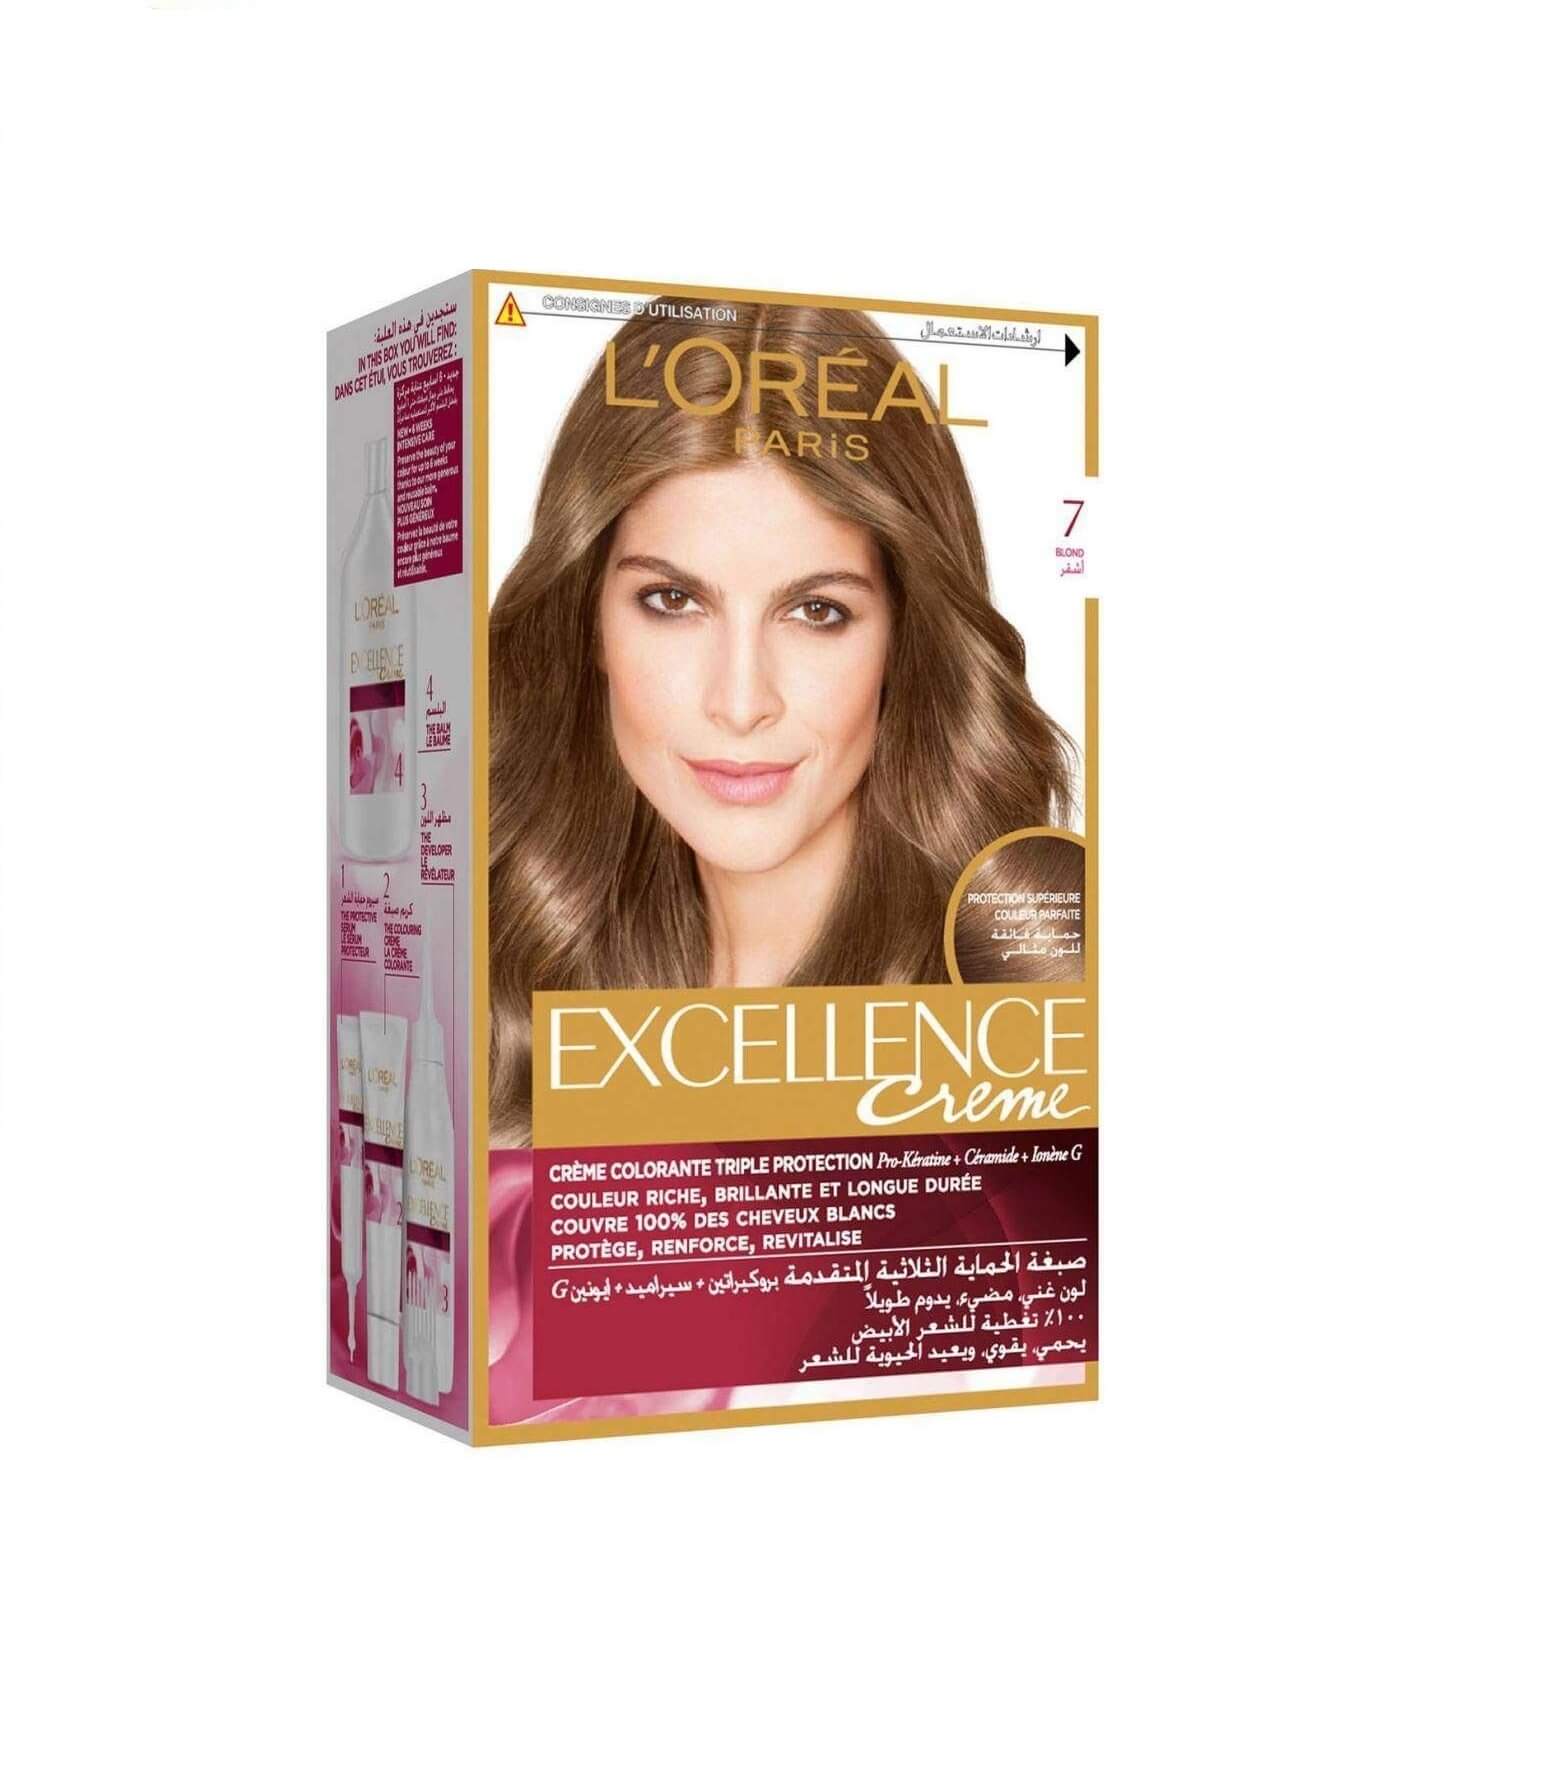 LOreal Excellence Creme - 7 Blonde